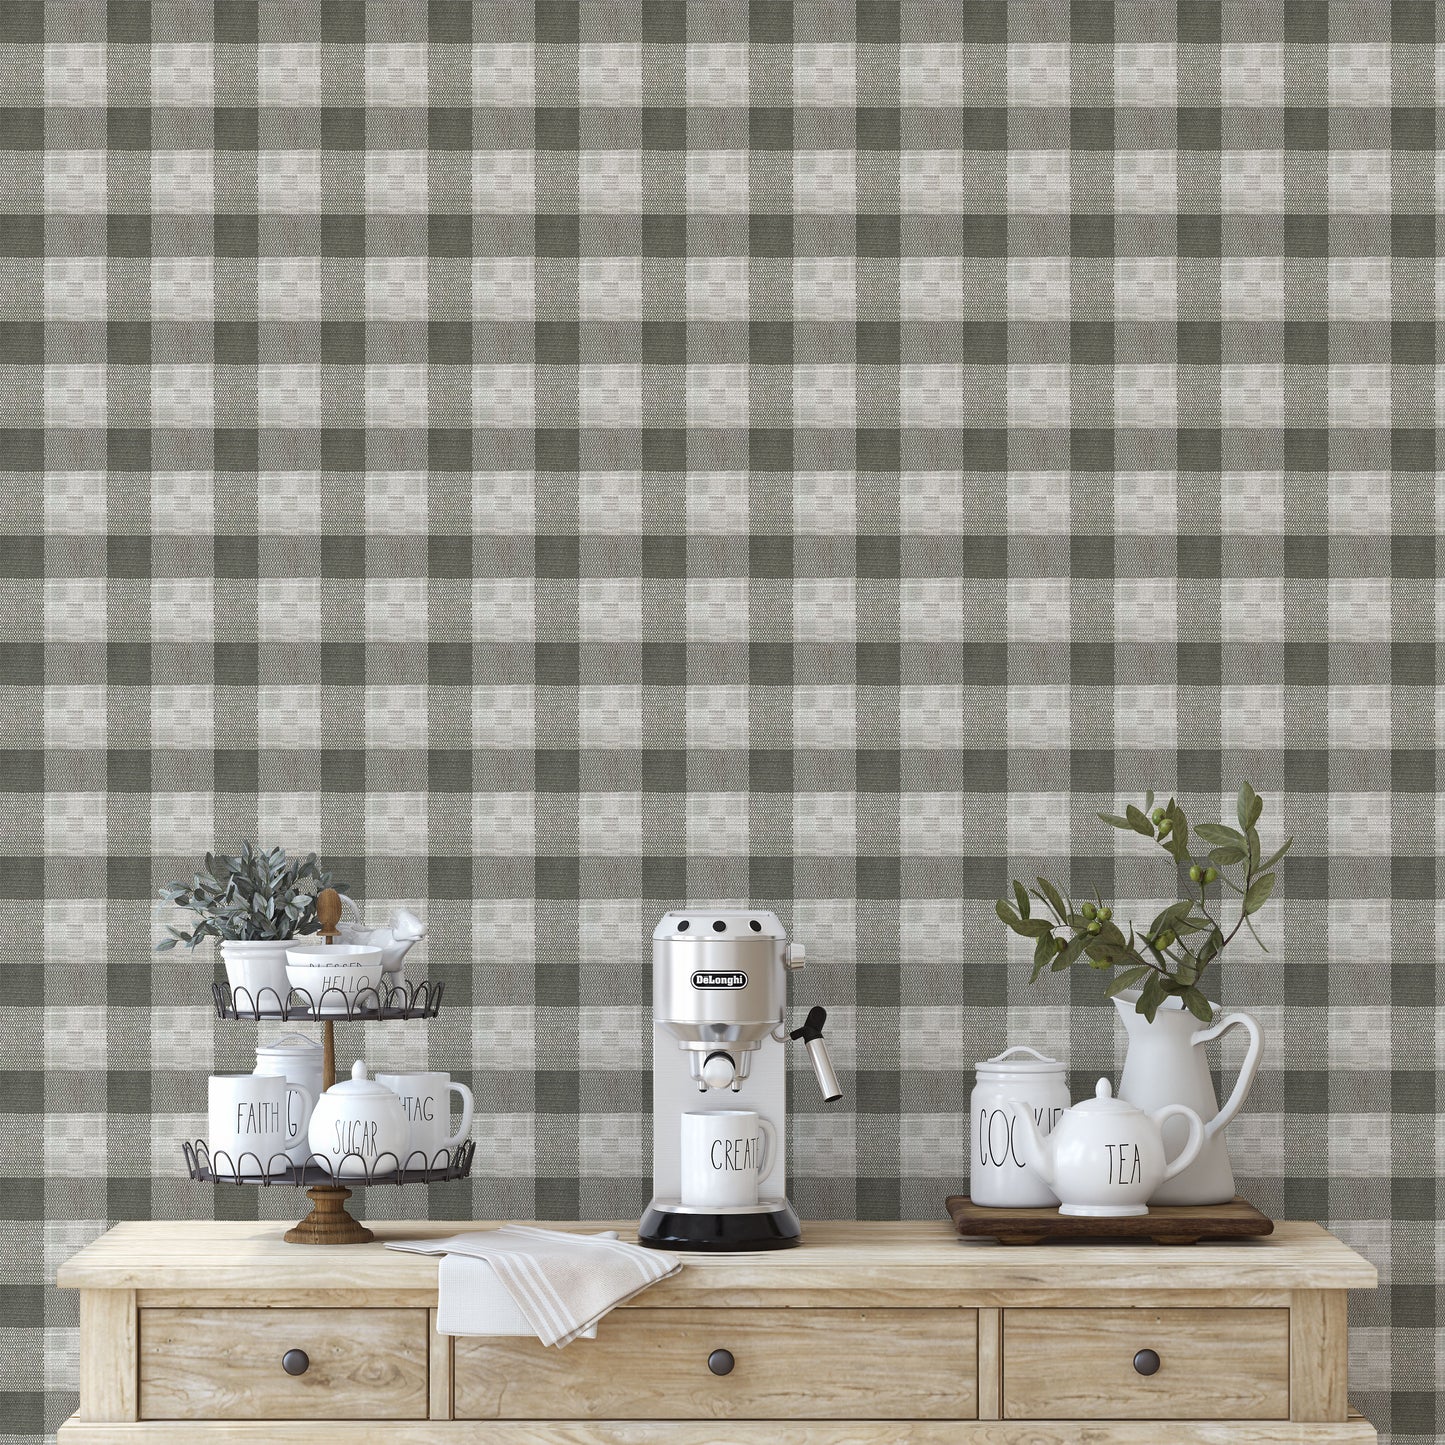 Medium print green and cream woven plaid pattern easy to install and remove peel and stick custom wallpaper available in different lengths/sizes locally created and printed in Canada. Removable, washable, durable, commercial grade, customizable and water proof.